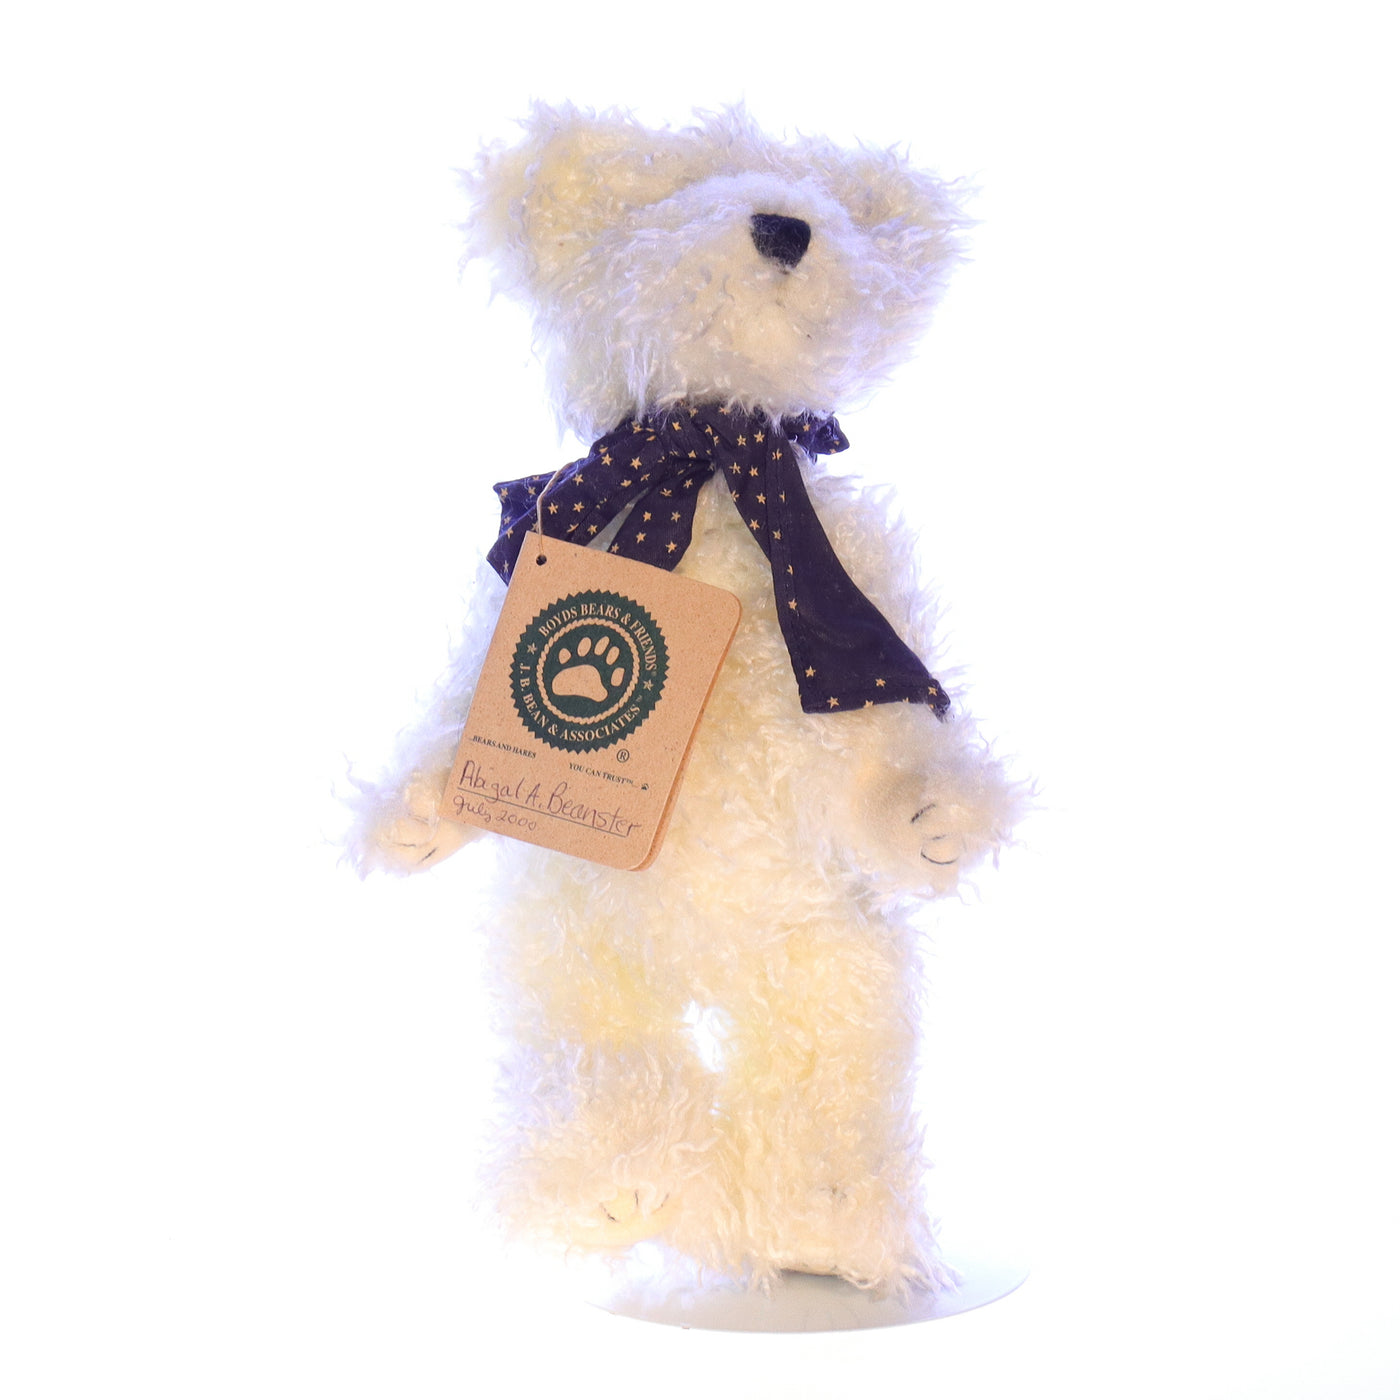 Boyds Bears Collection Plush with Tags J.B. Bean & Associates Abigal A. Beanster